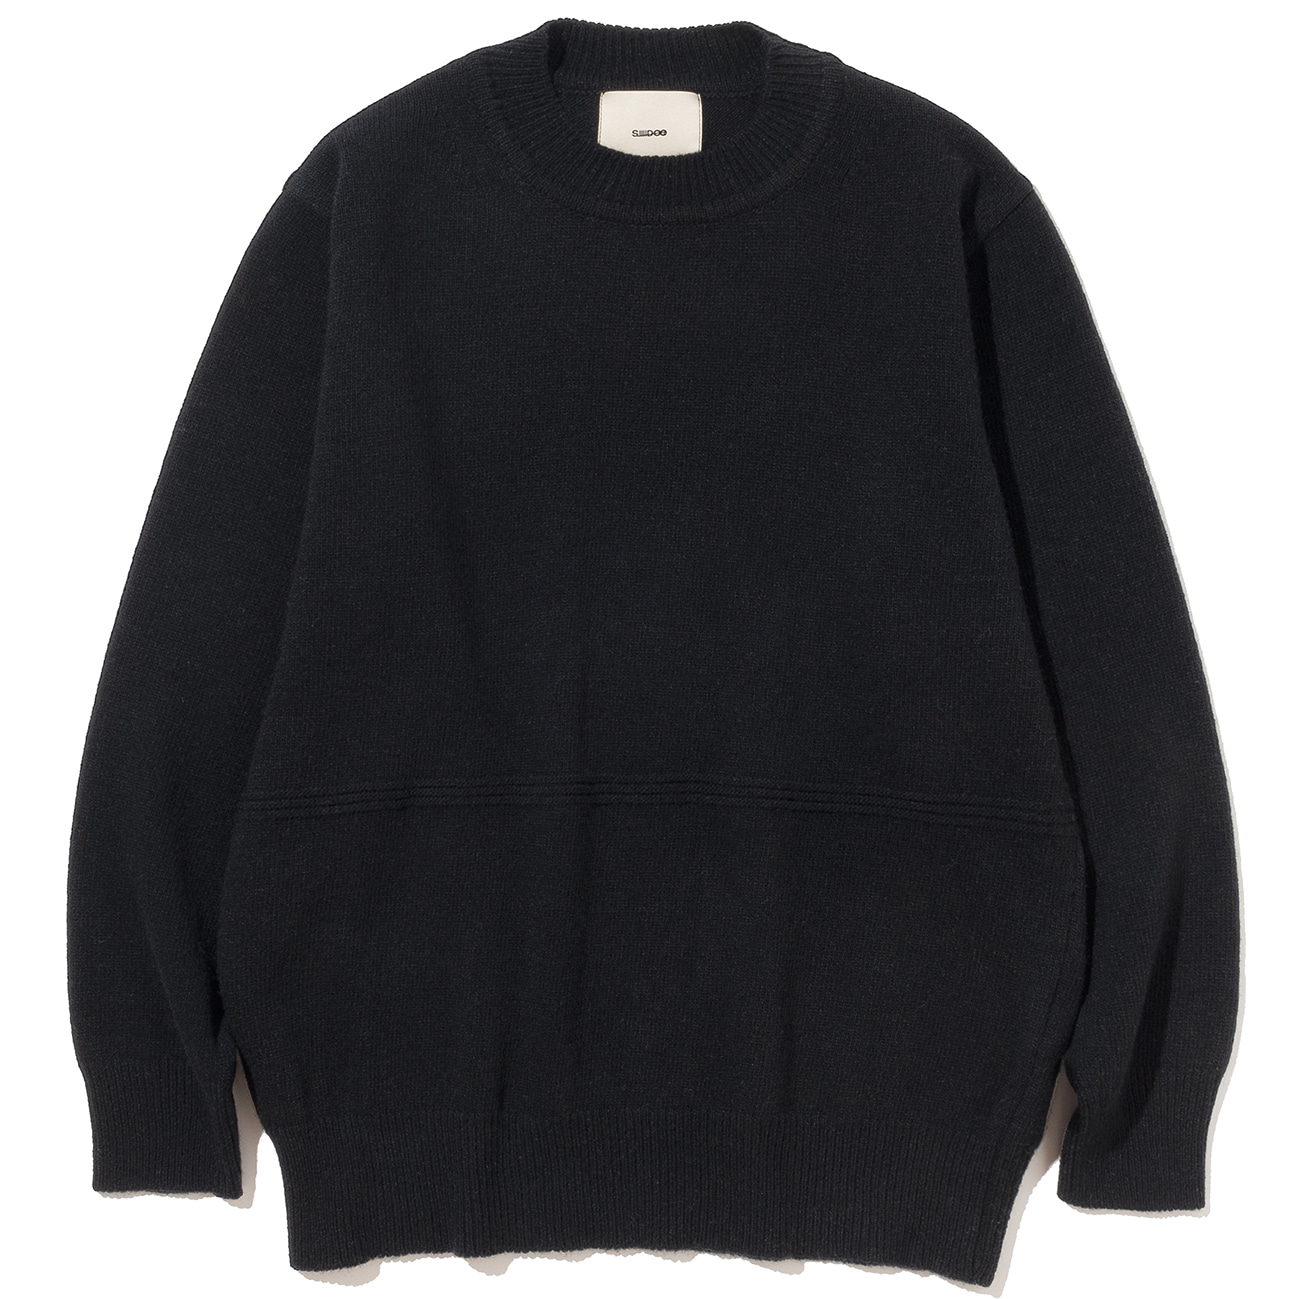 FT LINE LAMBSWOOL ROUND KNIT #4(2nd restock)